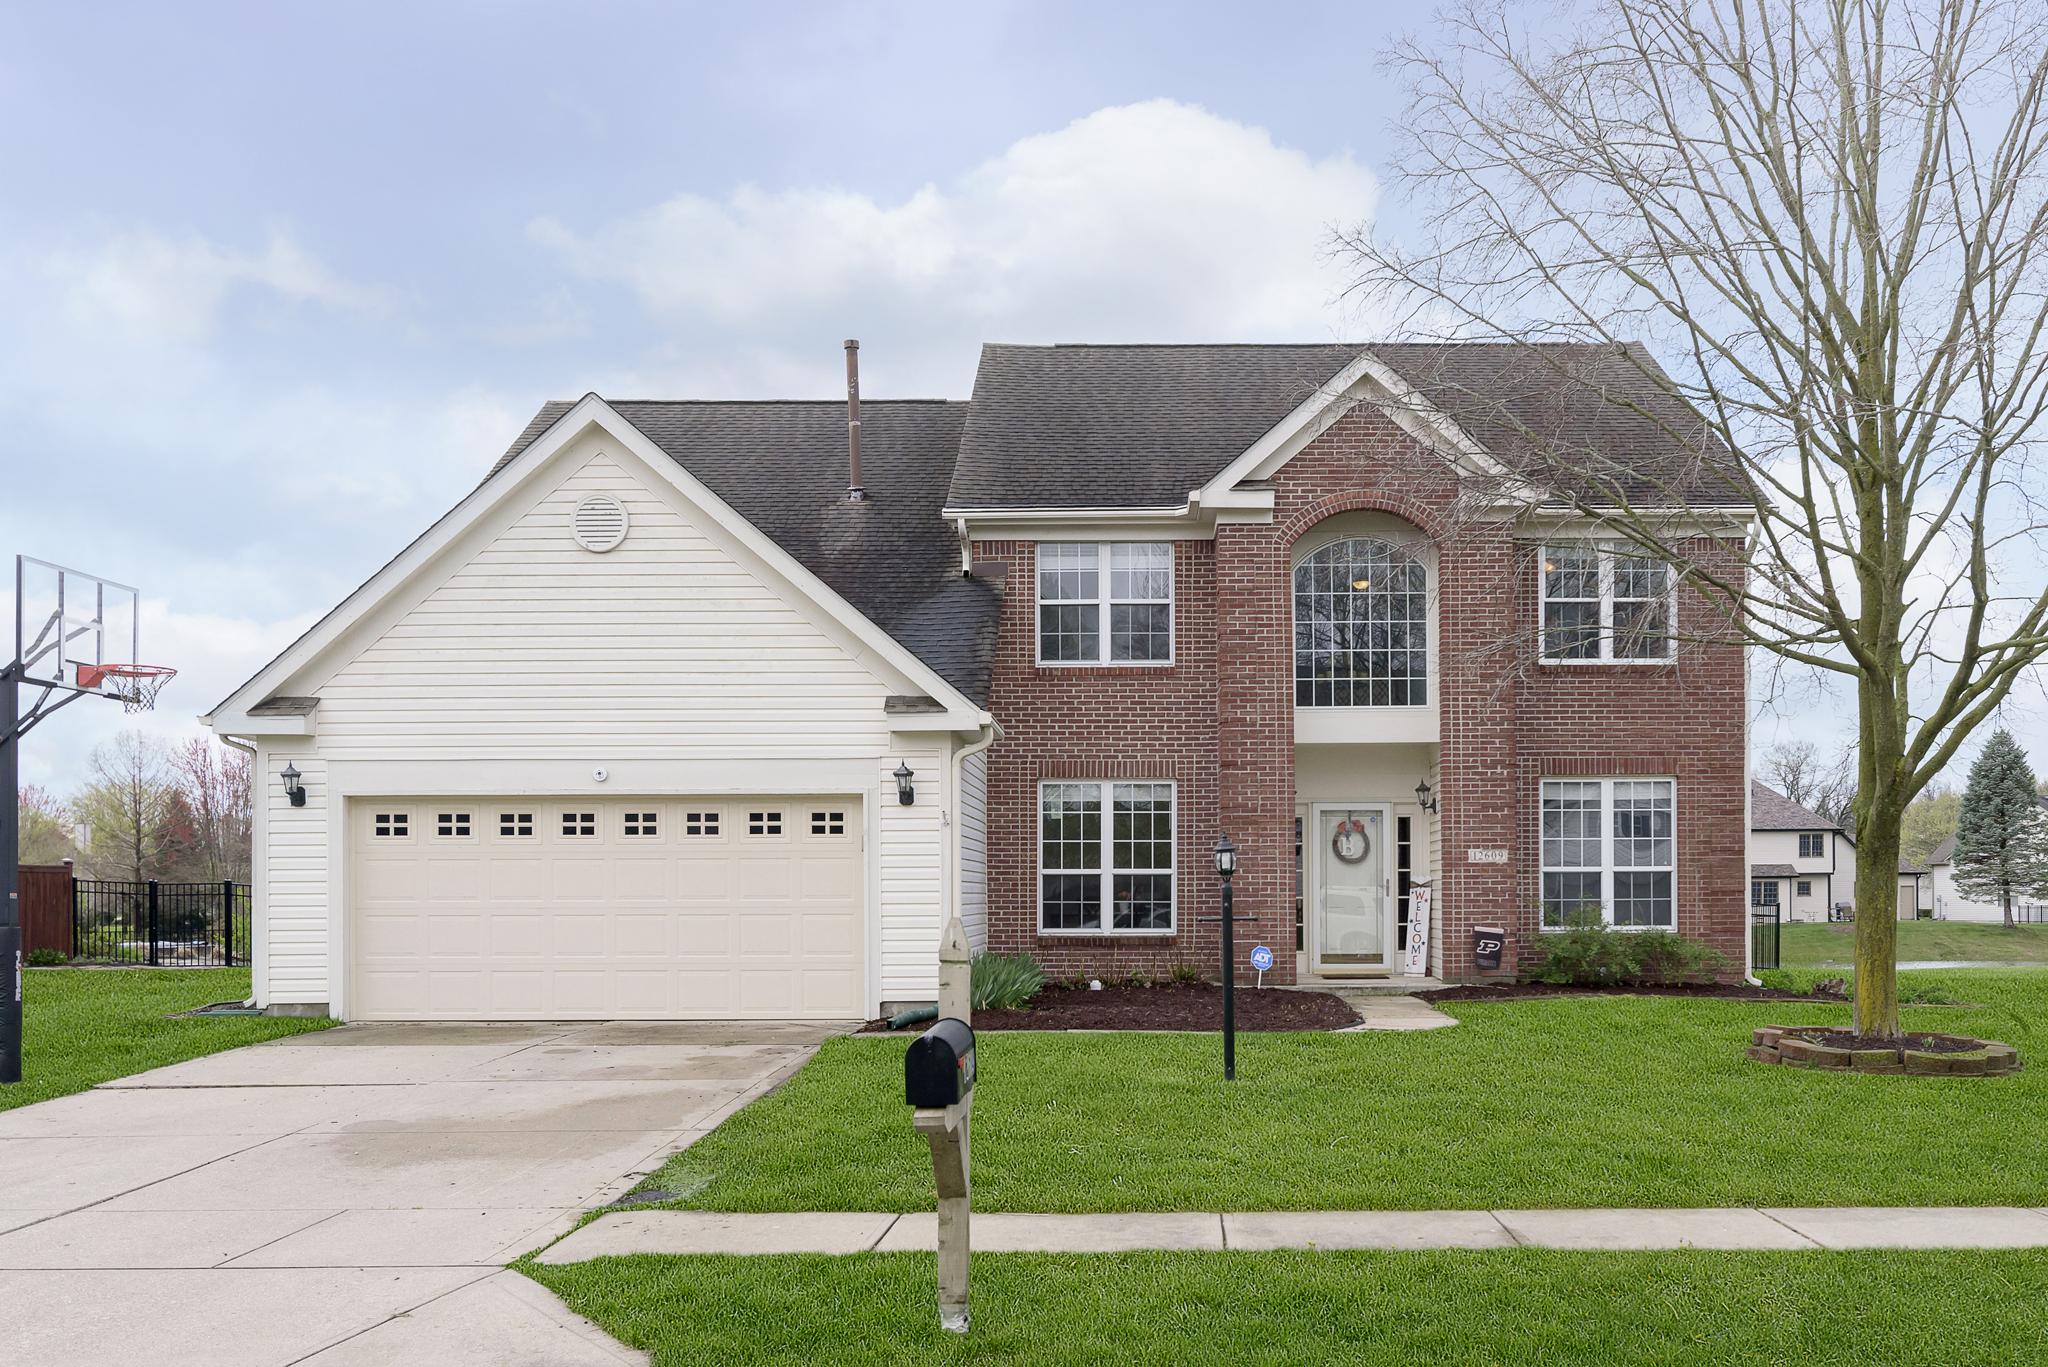 Photo one of 12609 Tealwood Dr Indianapolis IN 46236 | MLS 21973695